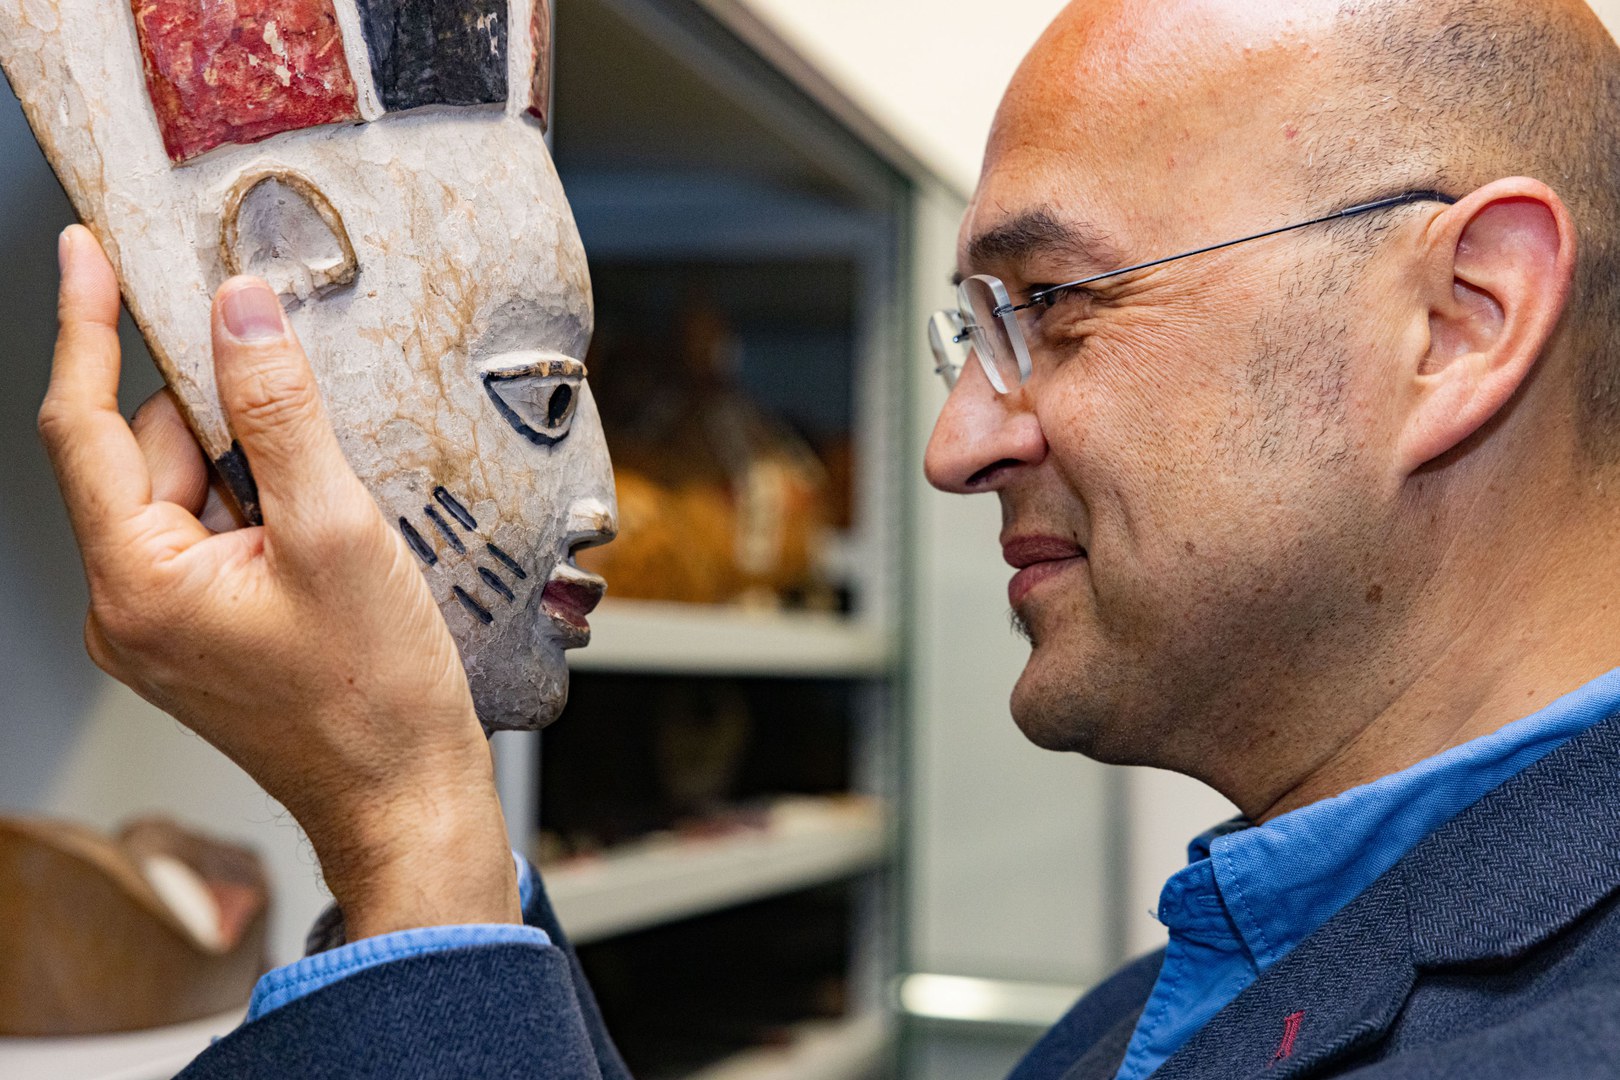 Anthropologist Prof. Dr. Paul Basu is a new Hertz Professor at the University of Bonn. The starting point for his work is a critical engagement with the heritage of Western knowledge production, especially as it is reflected in scientific archives and collections.